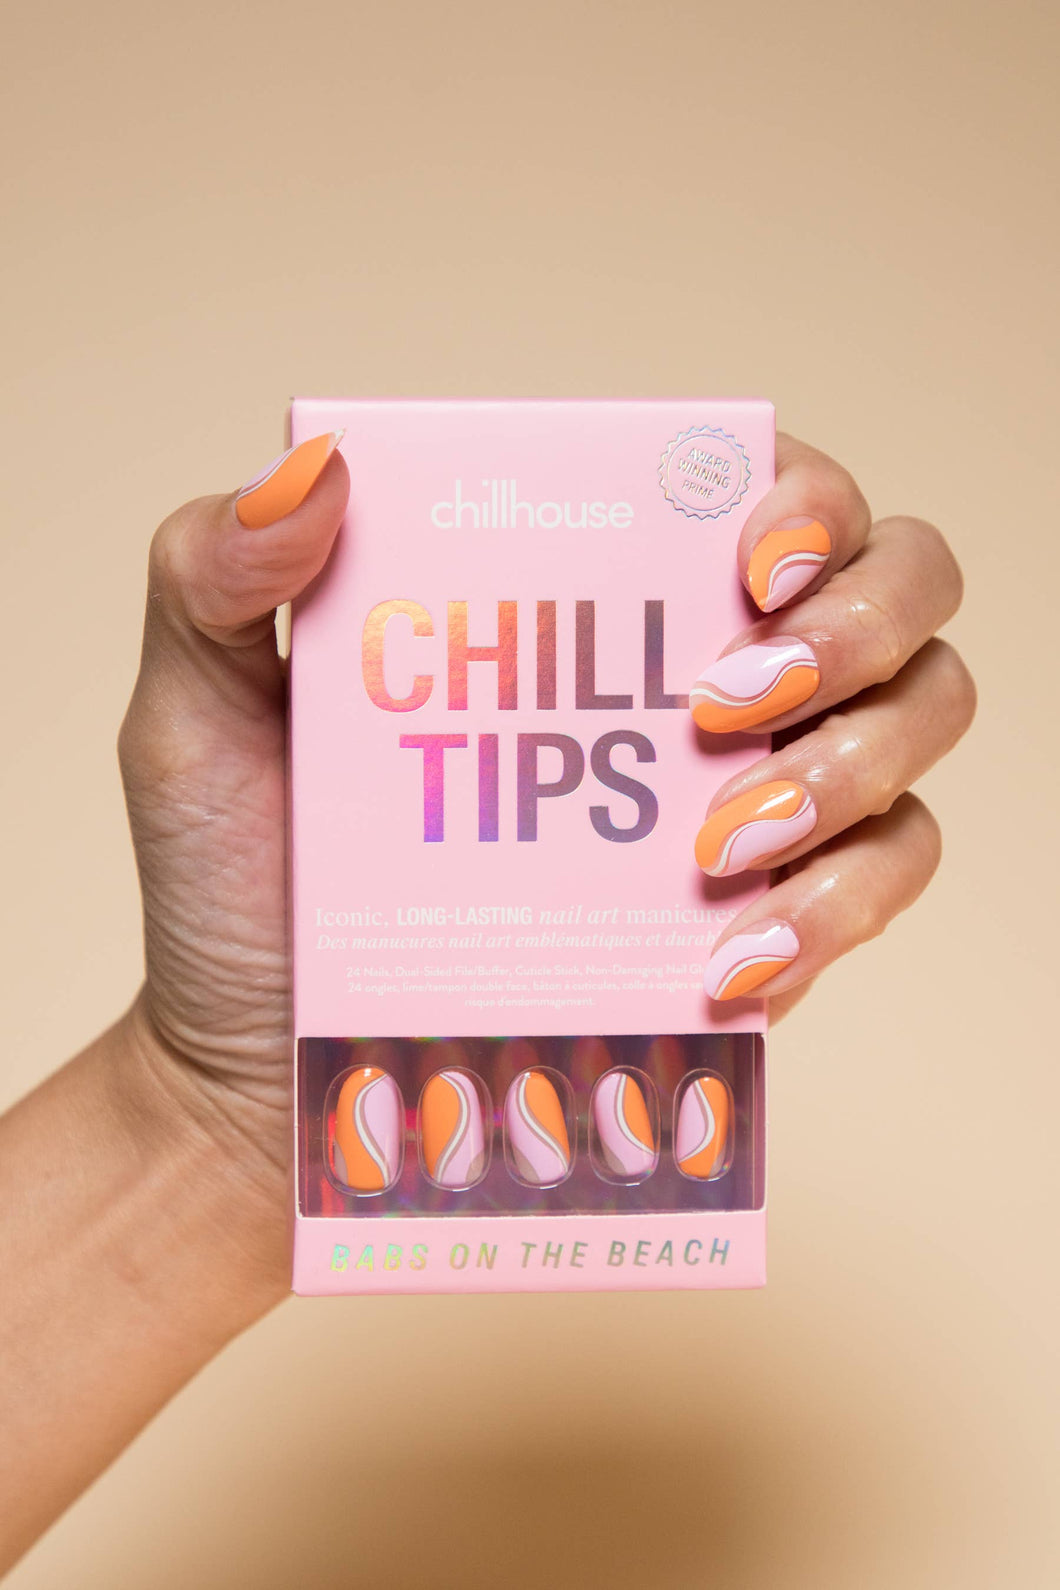 Chill Tips - Babs on the Beach